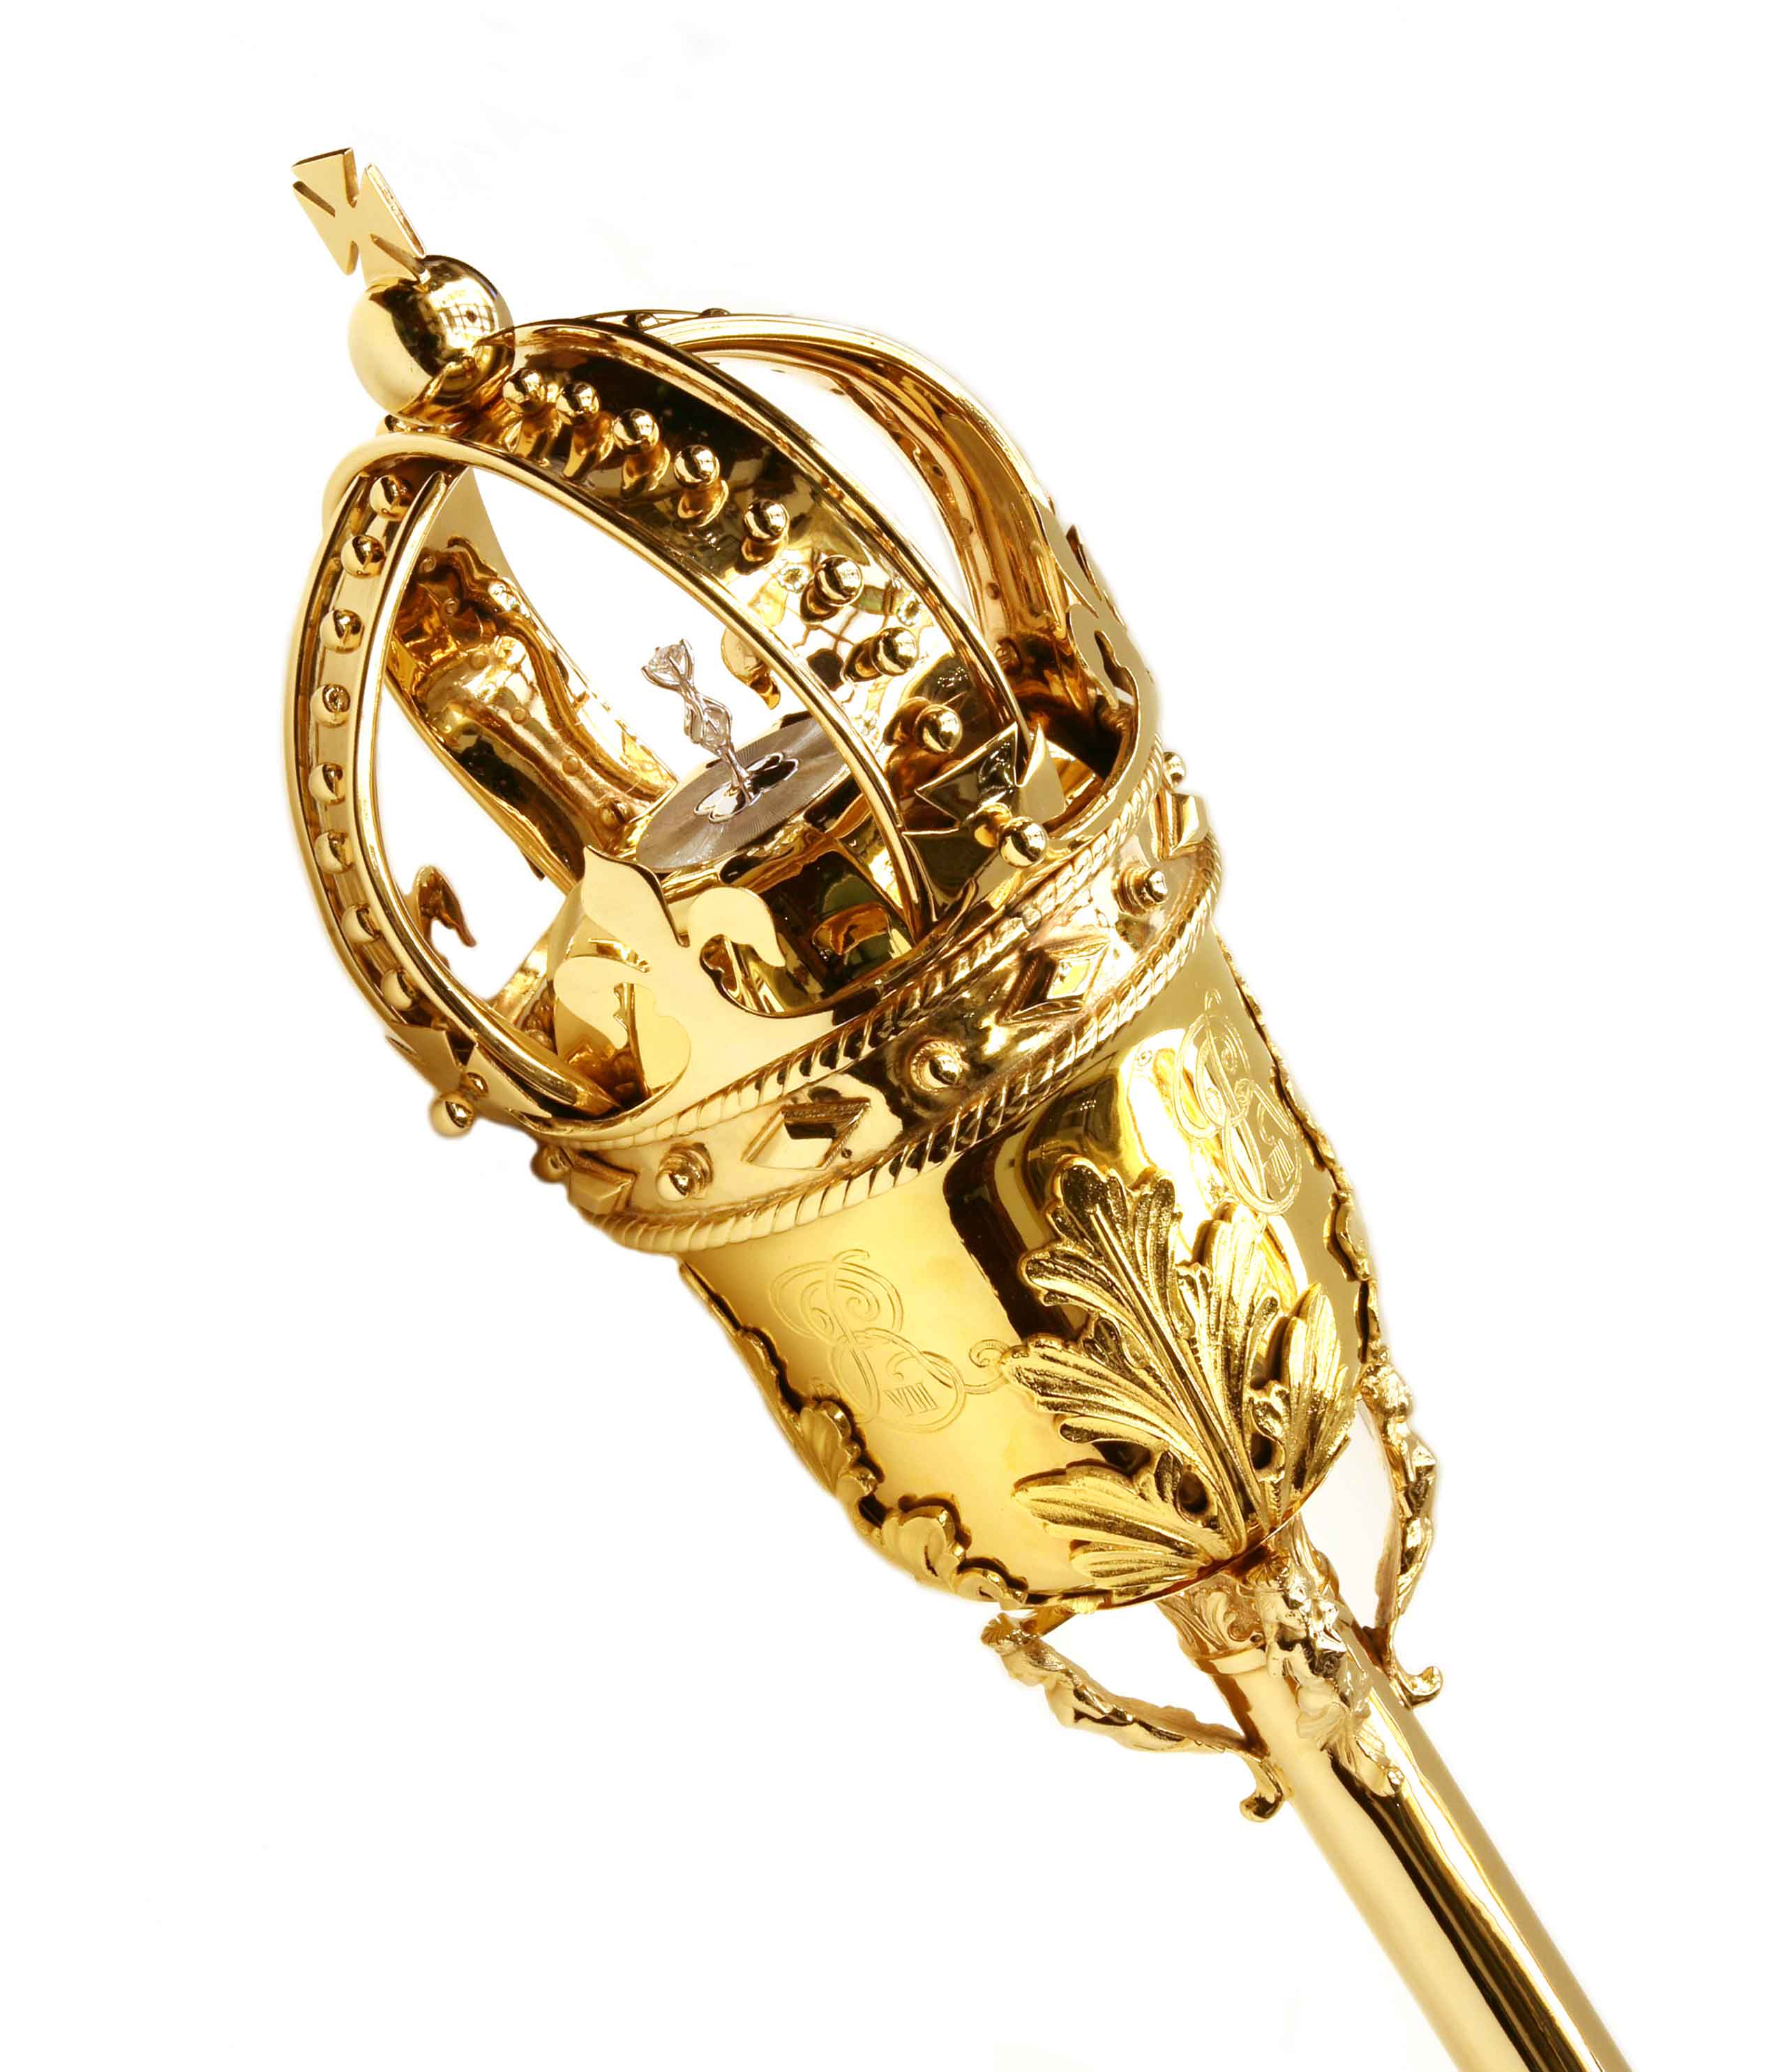 Detailed view of the crown on the Legislative Mace.